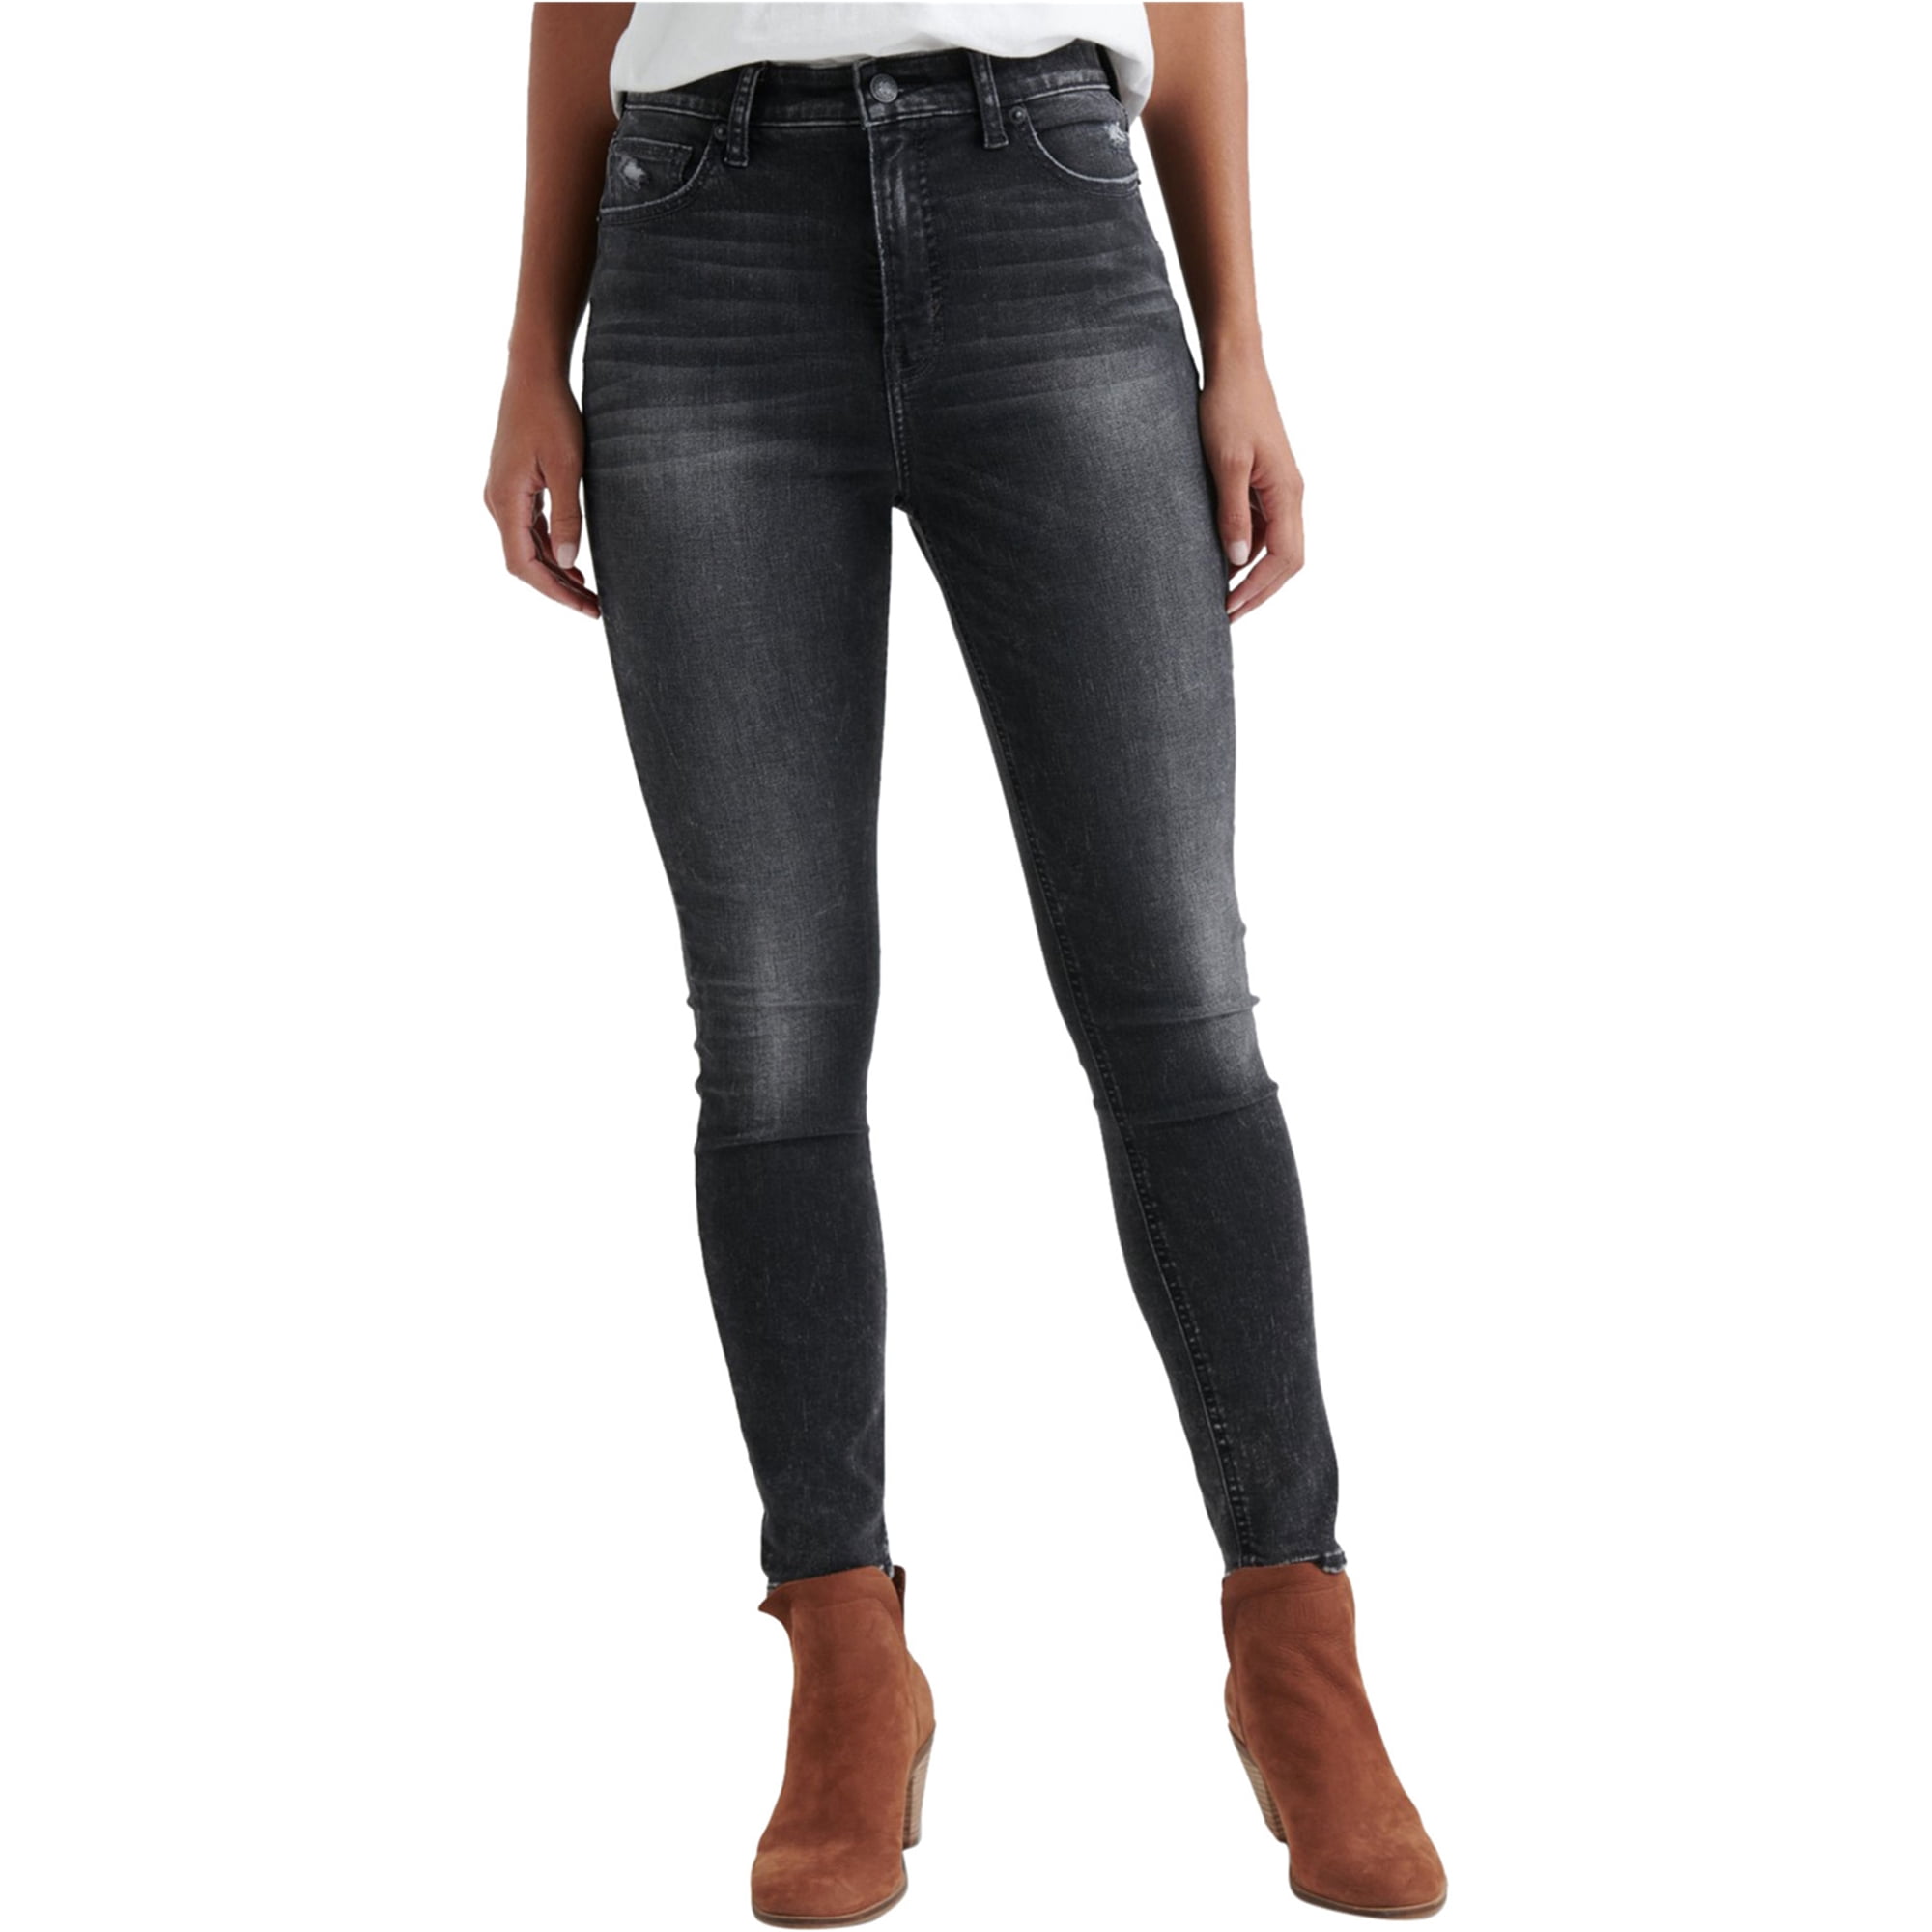 Lucky Brand Mujeres Bridgette Skinny Fit Jeans negro 25W/28 Lucky Brand  Skinny Fit